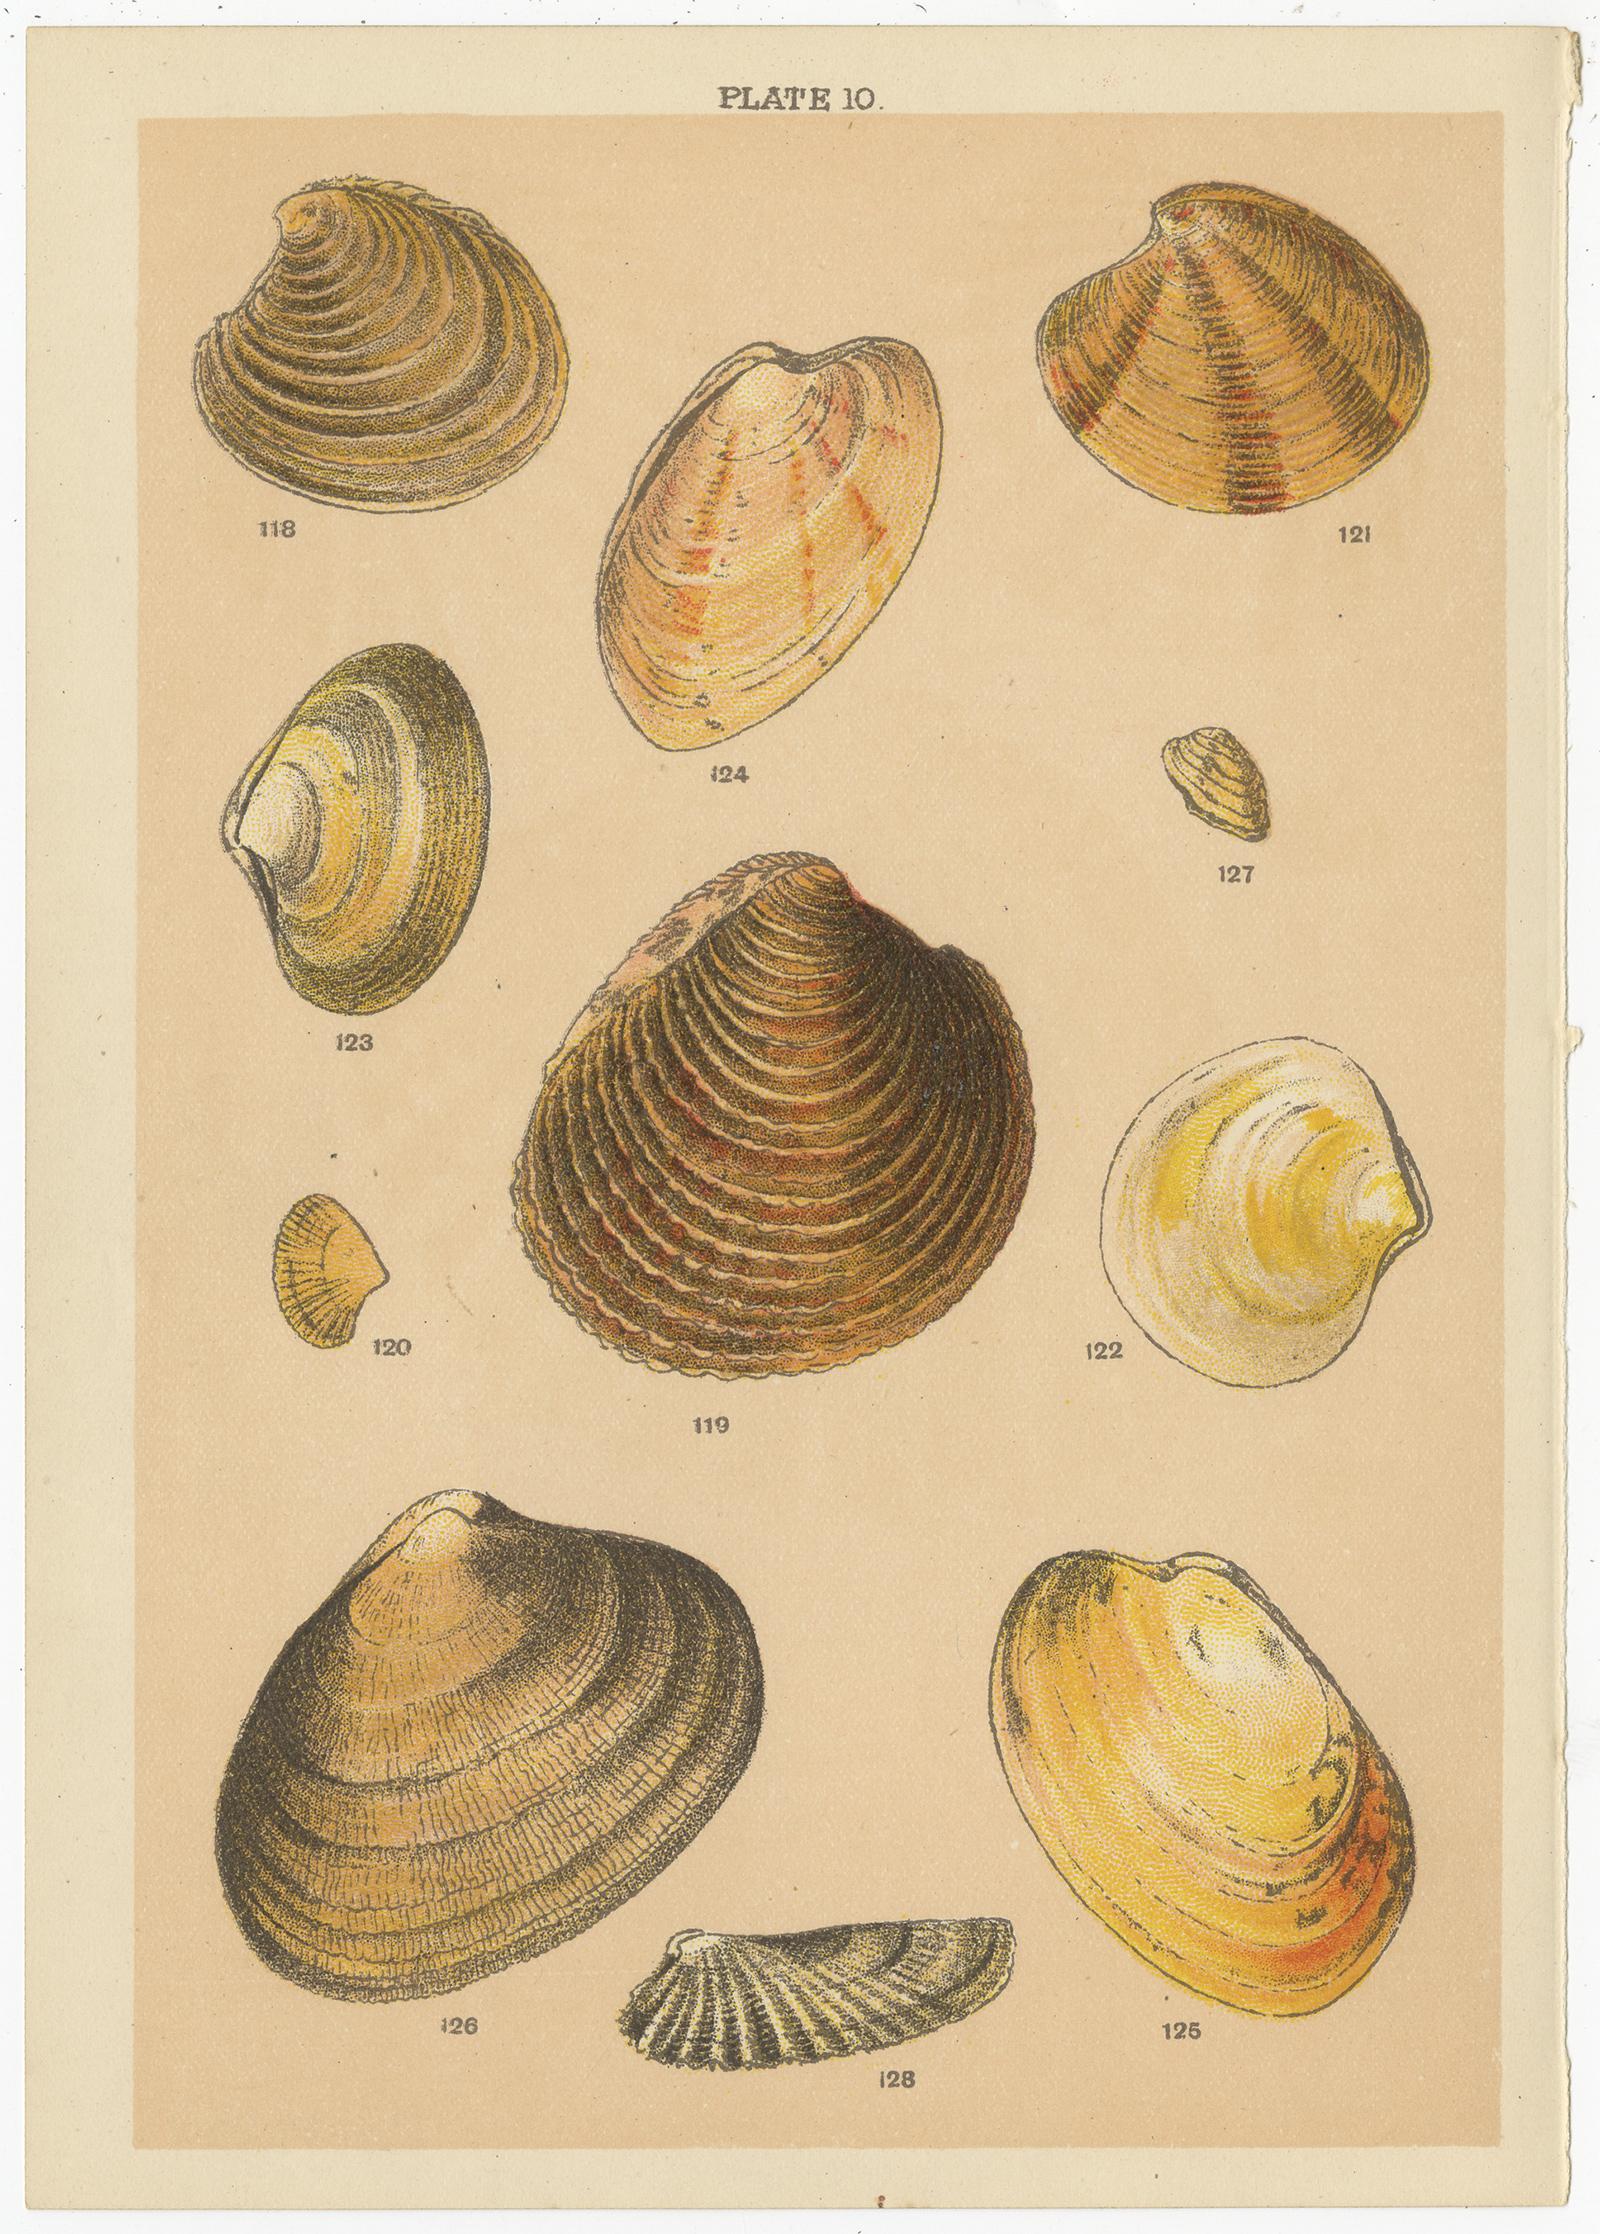 Set of 10 Antique Prints of Shells Including Molluscs by Gordon 'circa 1900' For Sale 4